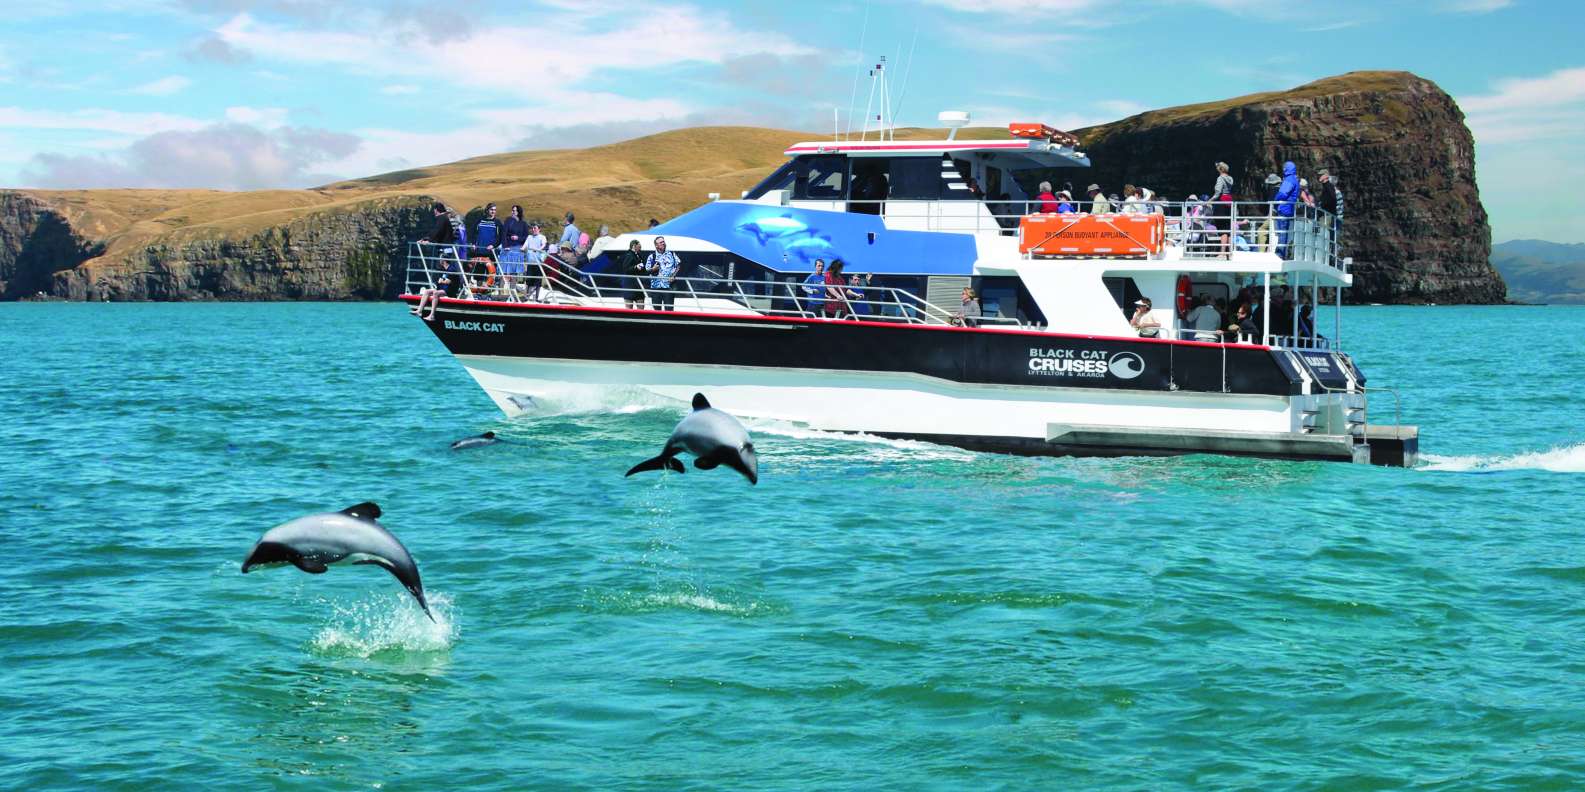 What to do in Akaroa